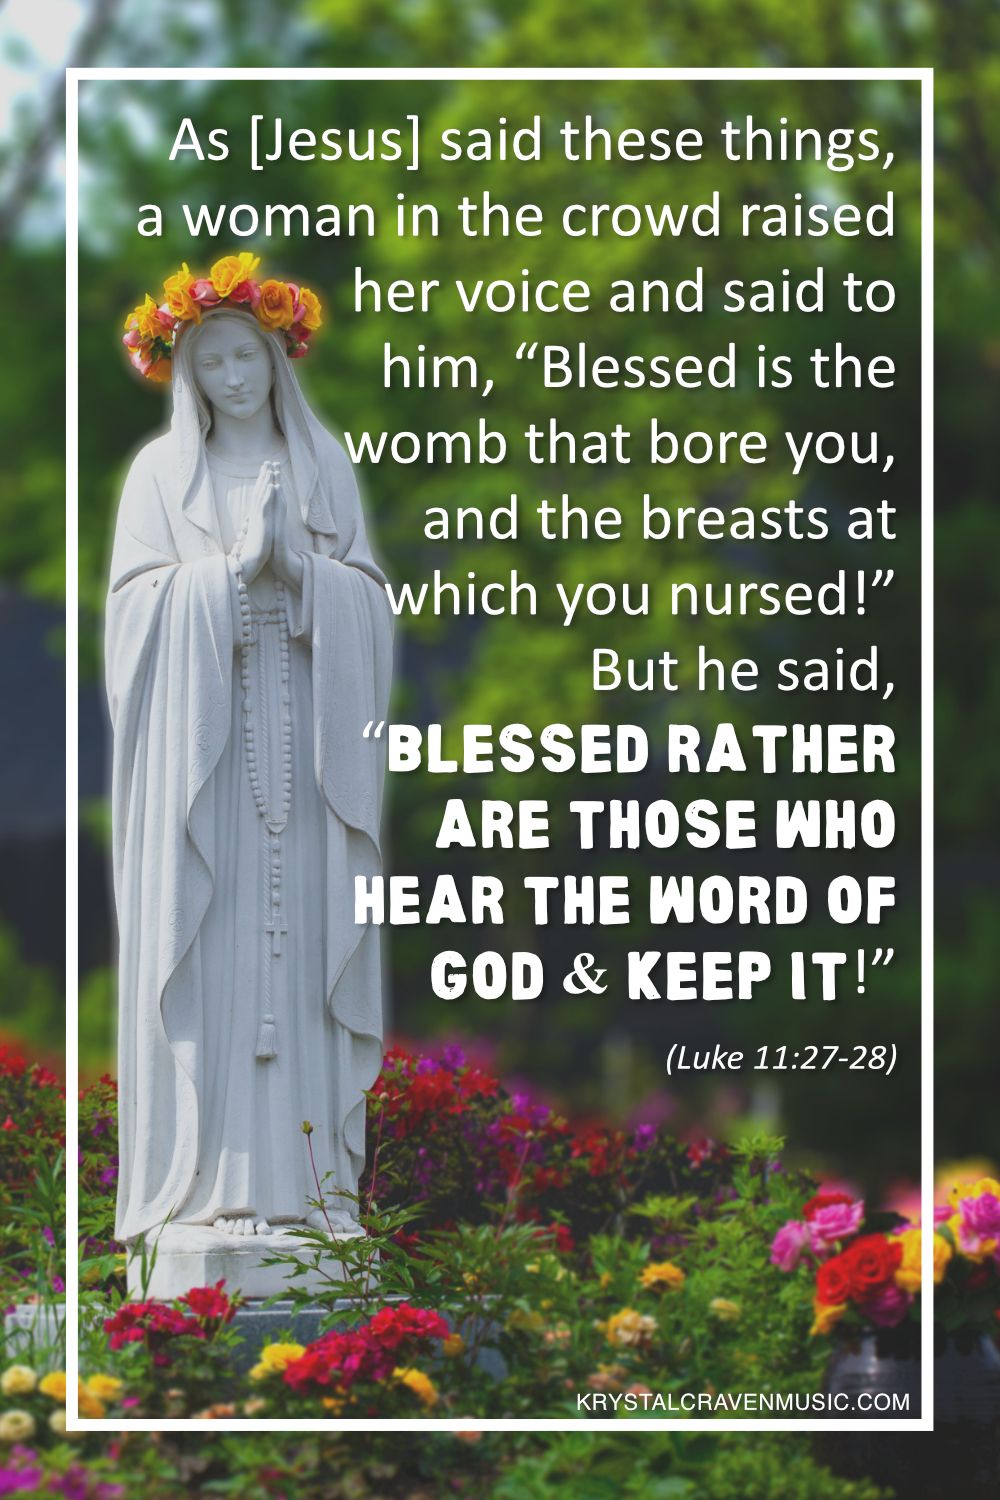 The text from Luke 11:27-28 "As he said these things, a woman in the crowd raised her voice and said to him, “Blessed is the womb that bore you, and the breasts at which you nursed!” But he said, “Blessed rather are those who hear the word of God and keep it!”" overlaying an image of a statue of Mary the mother of Jesus with a flower wreath on the head of the statue in a garden.